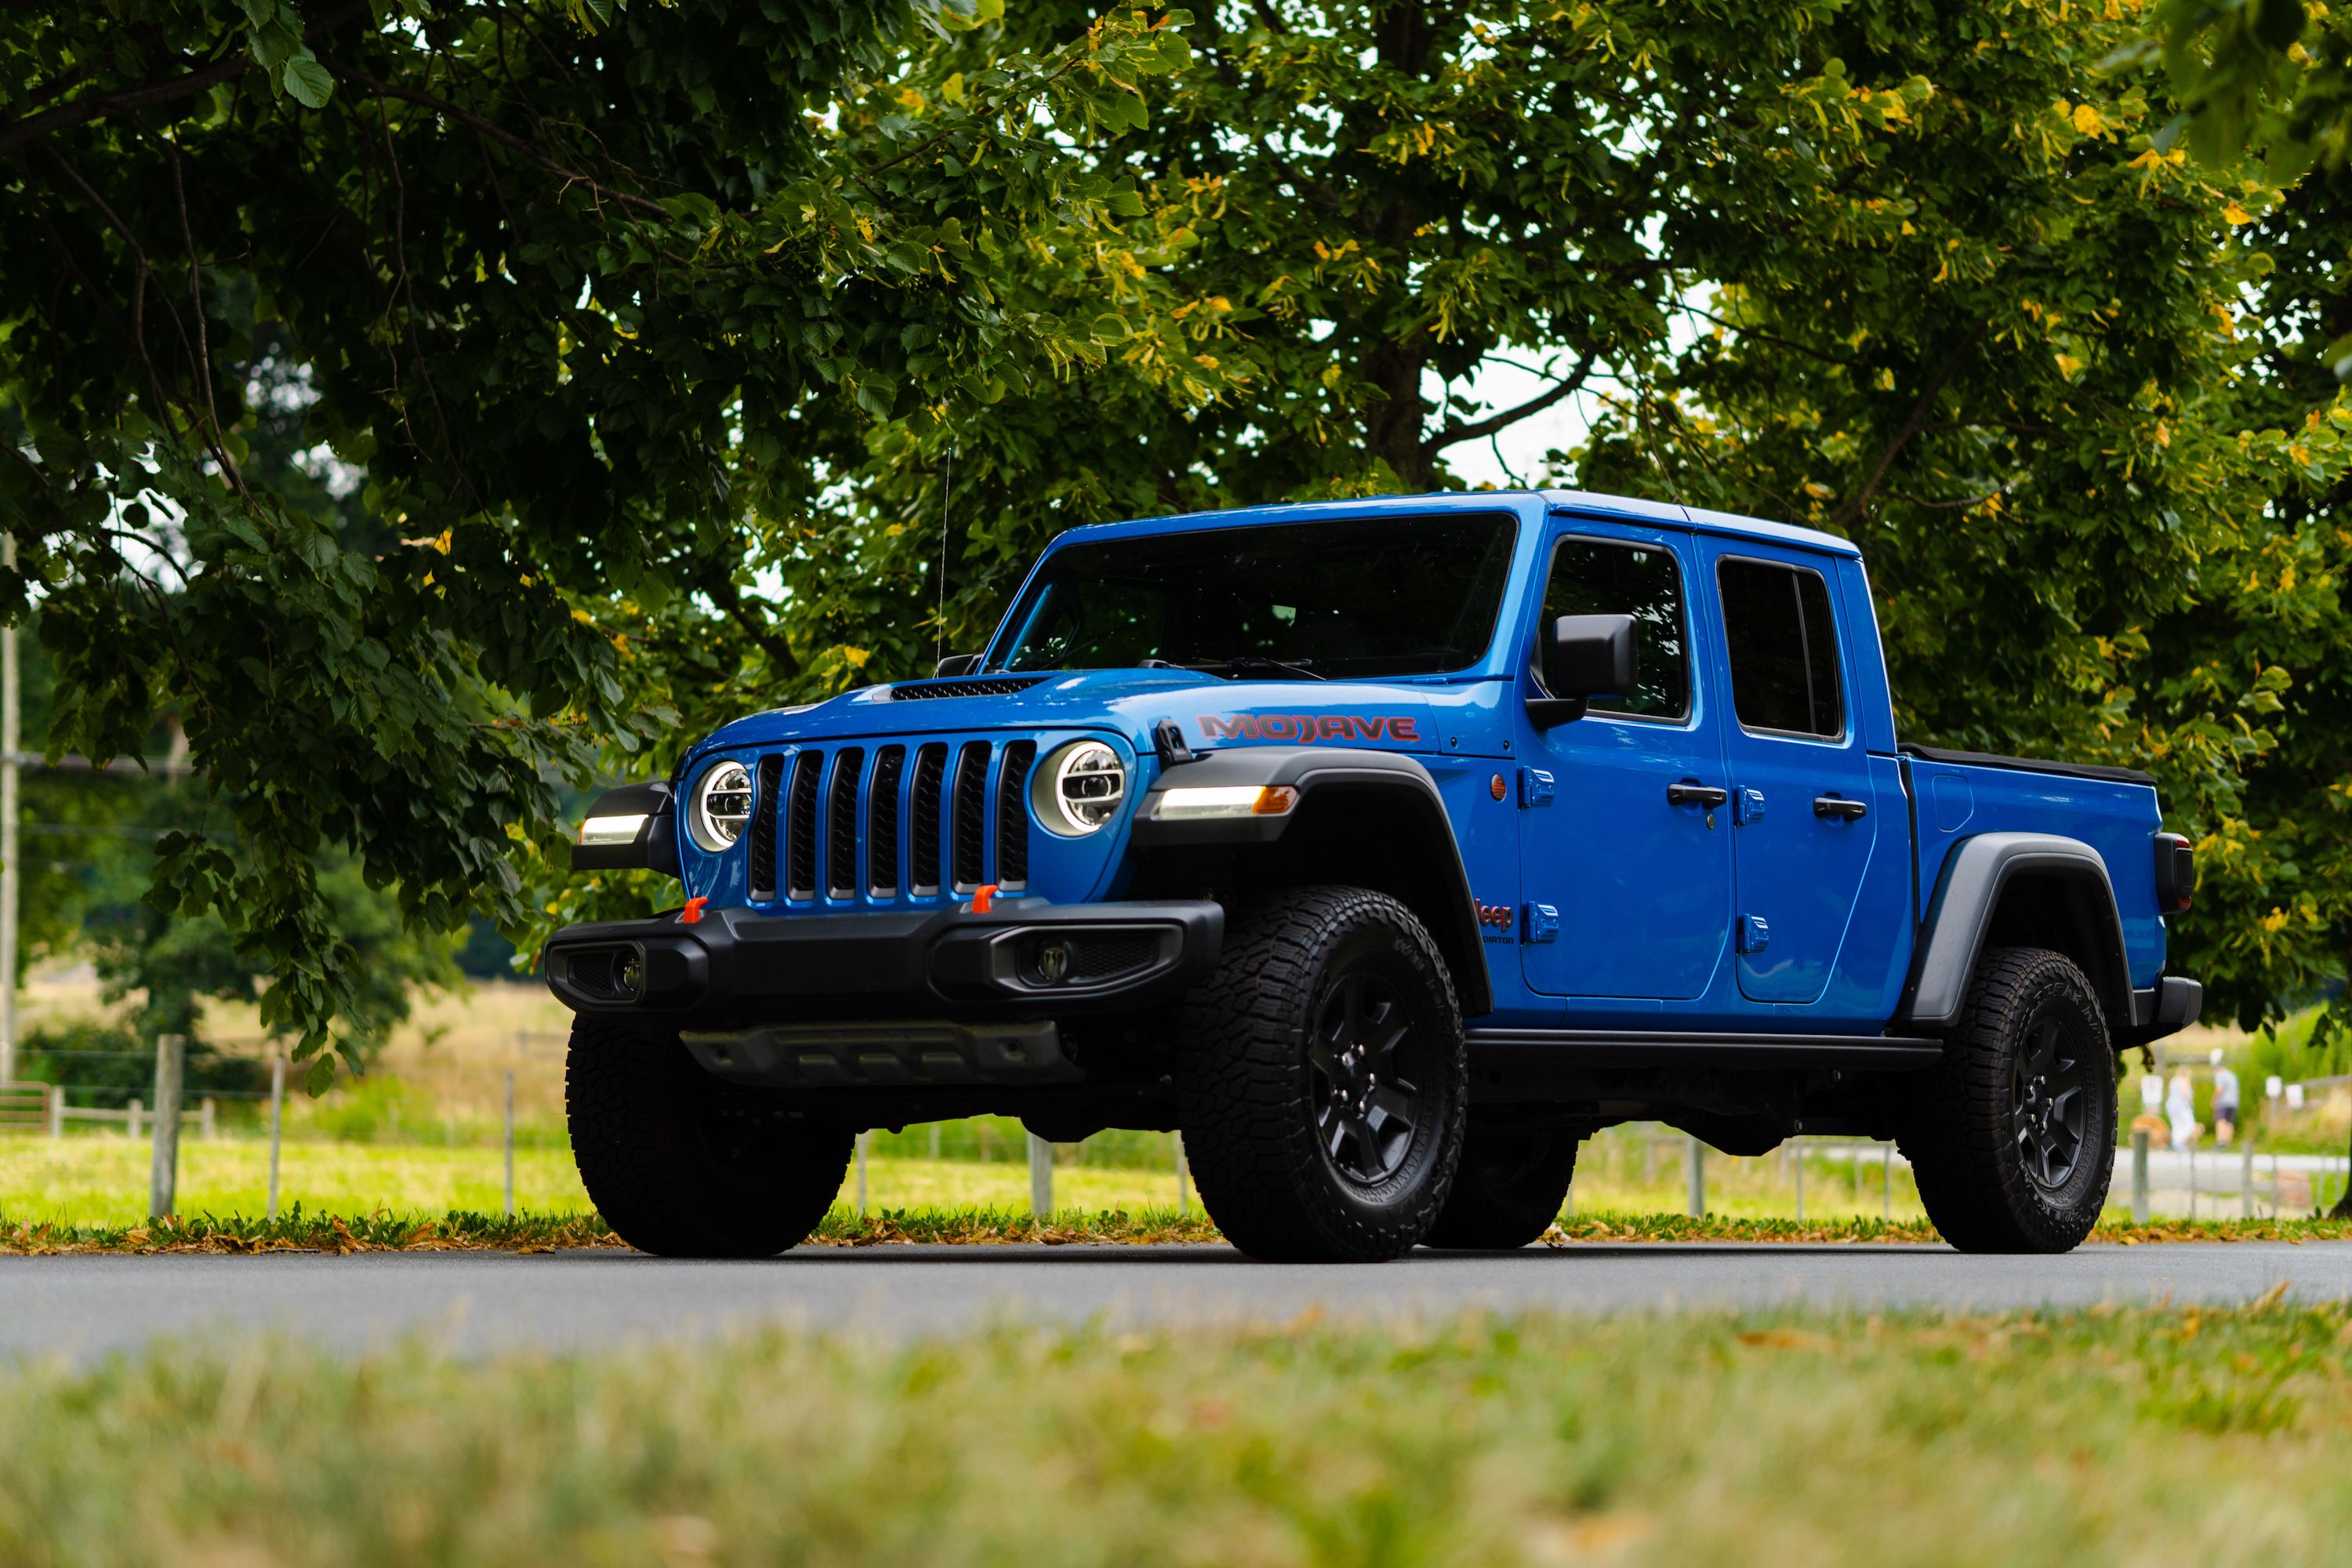 2020 Jeep Gladiator Mojave Is Not the One to Get - Review